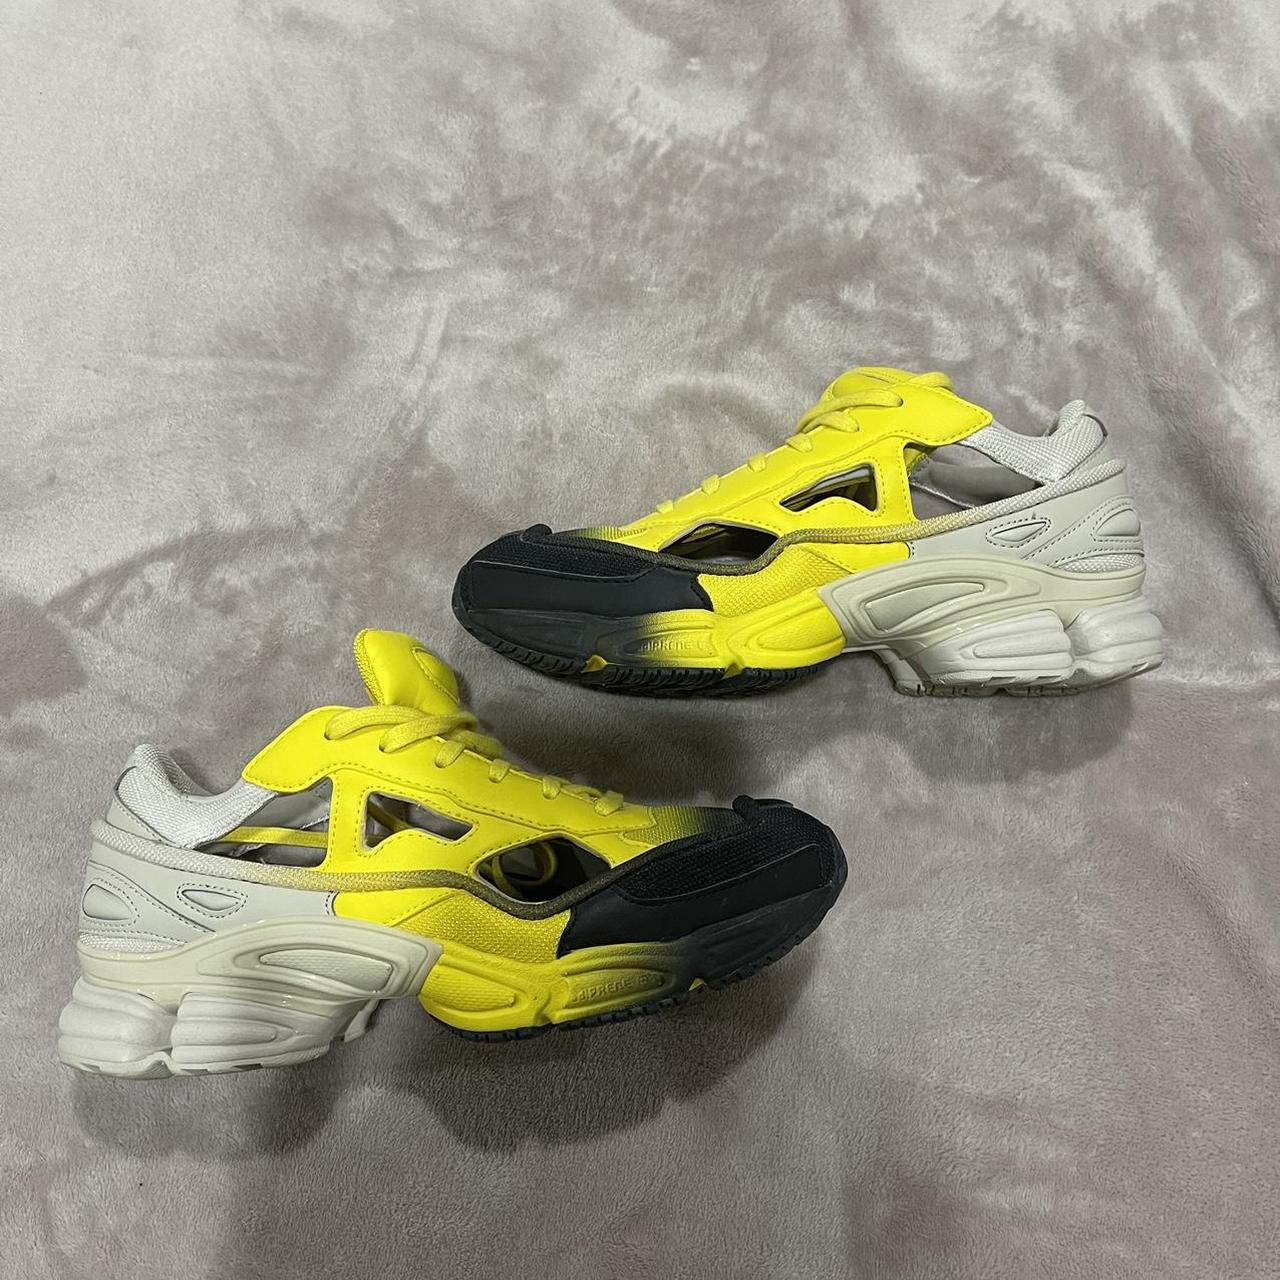 Raf Simons Men's Yellow and Black Trainers